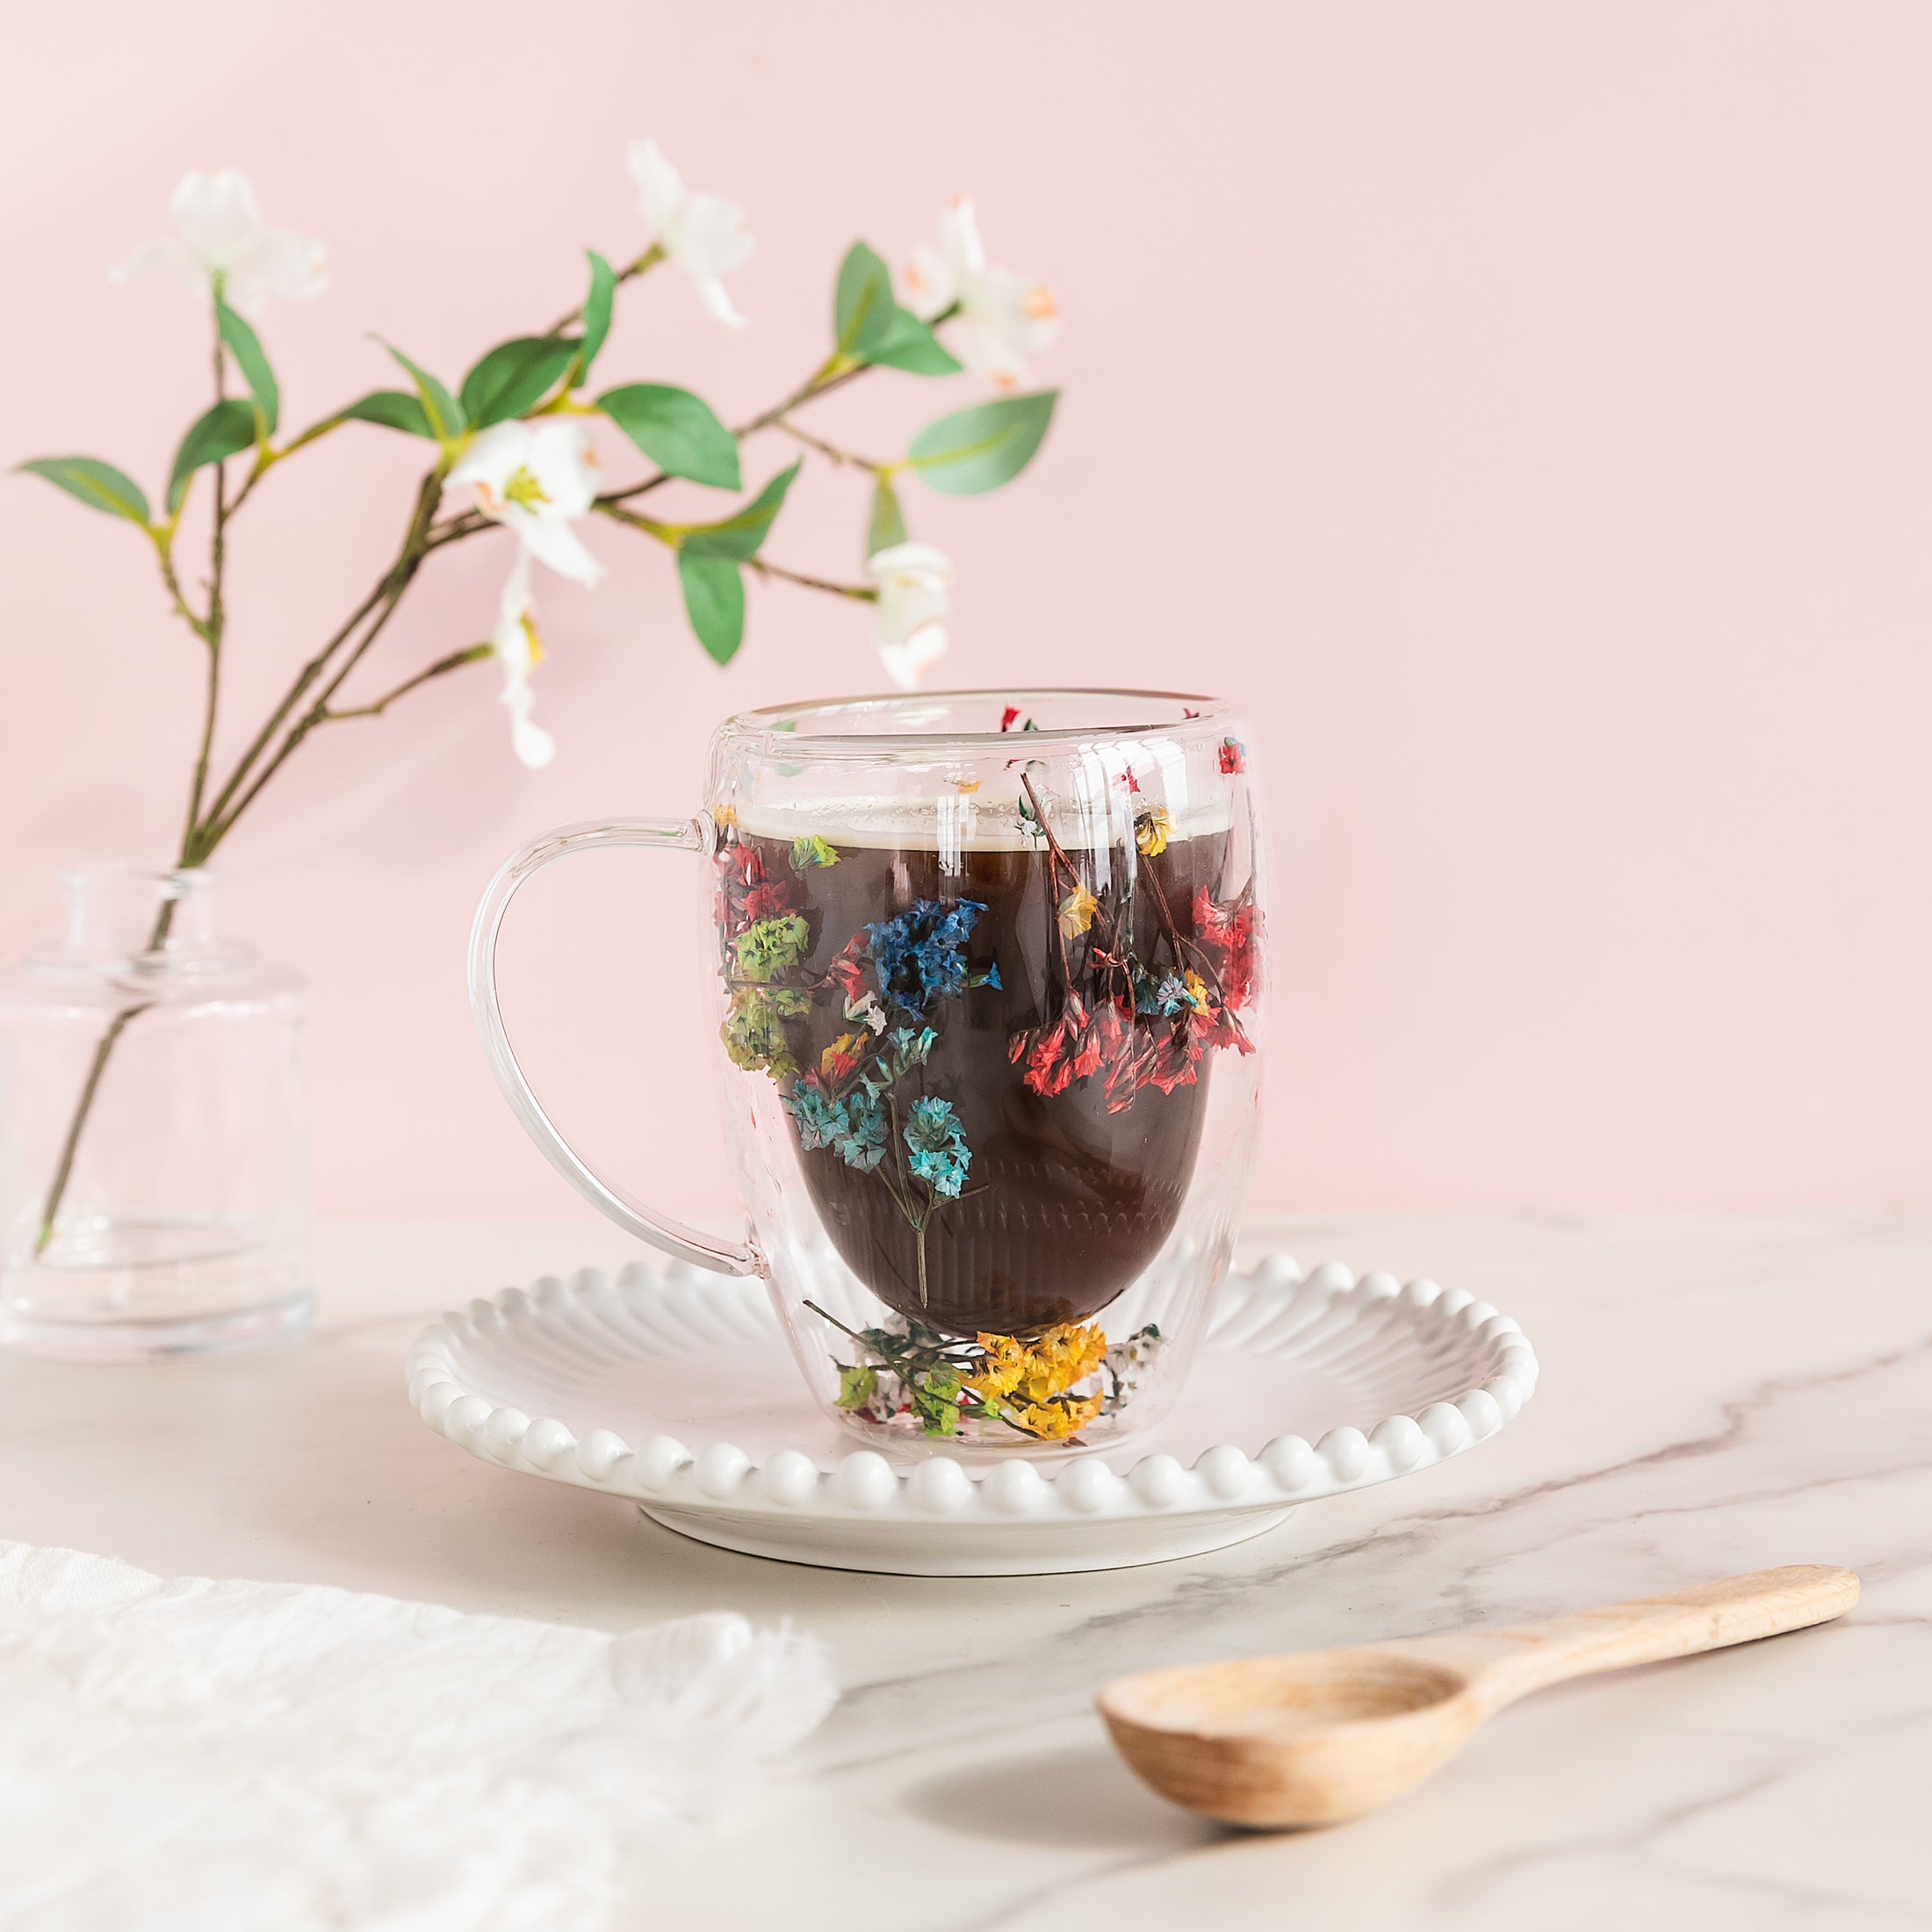 a cup of hot chocolate with flowers in it